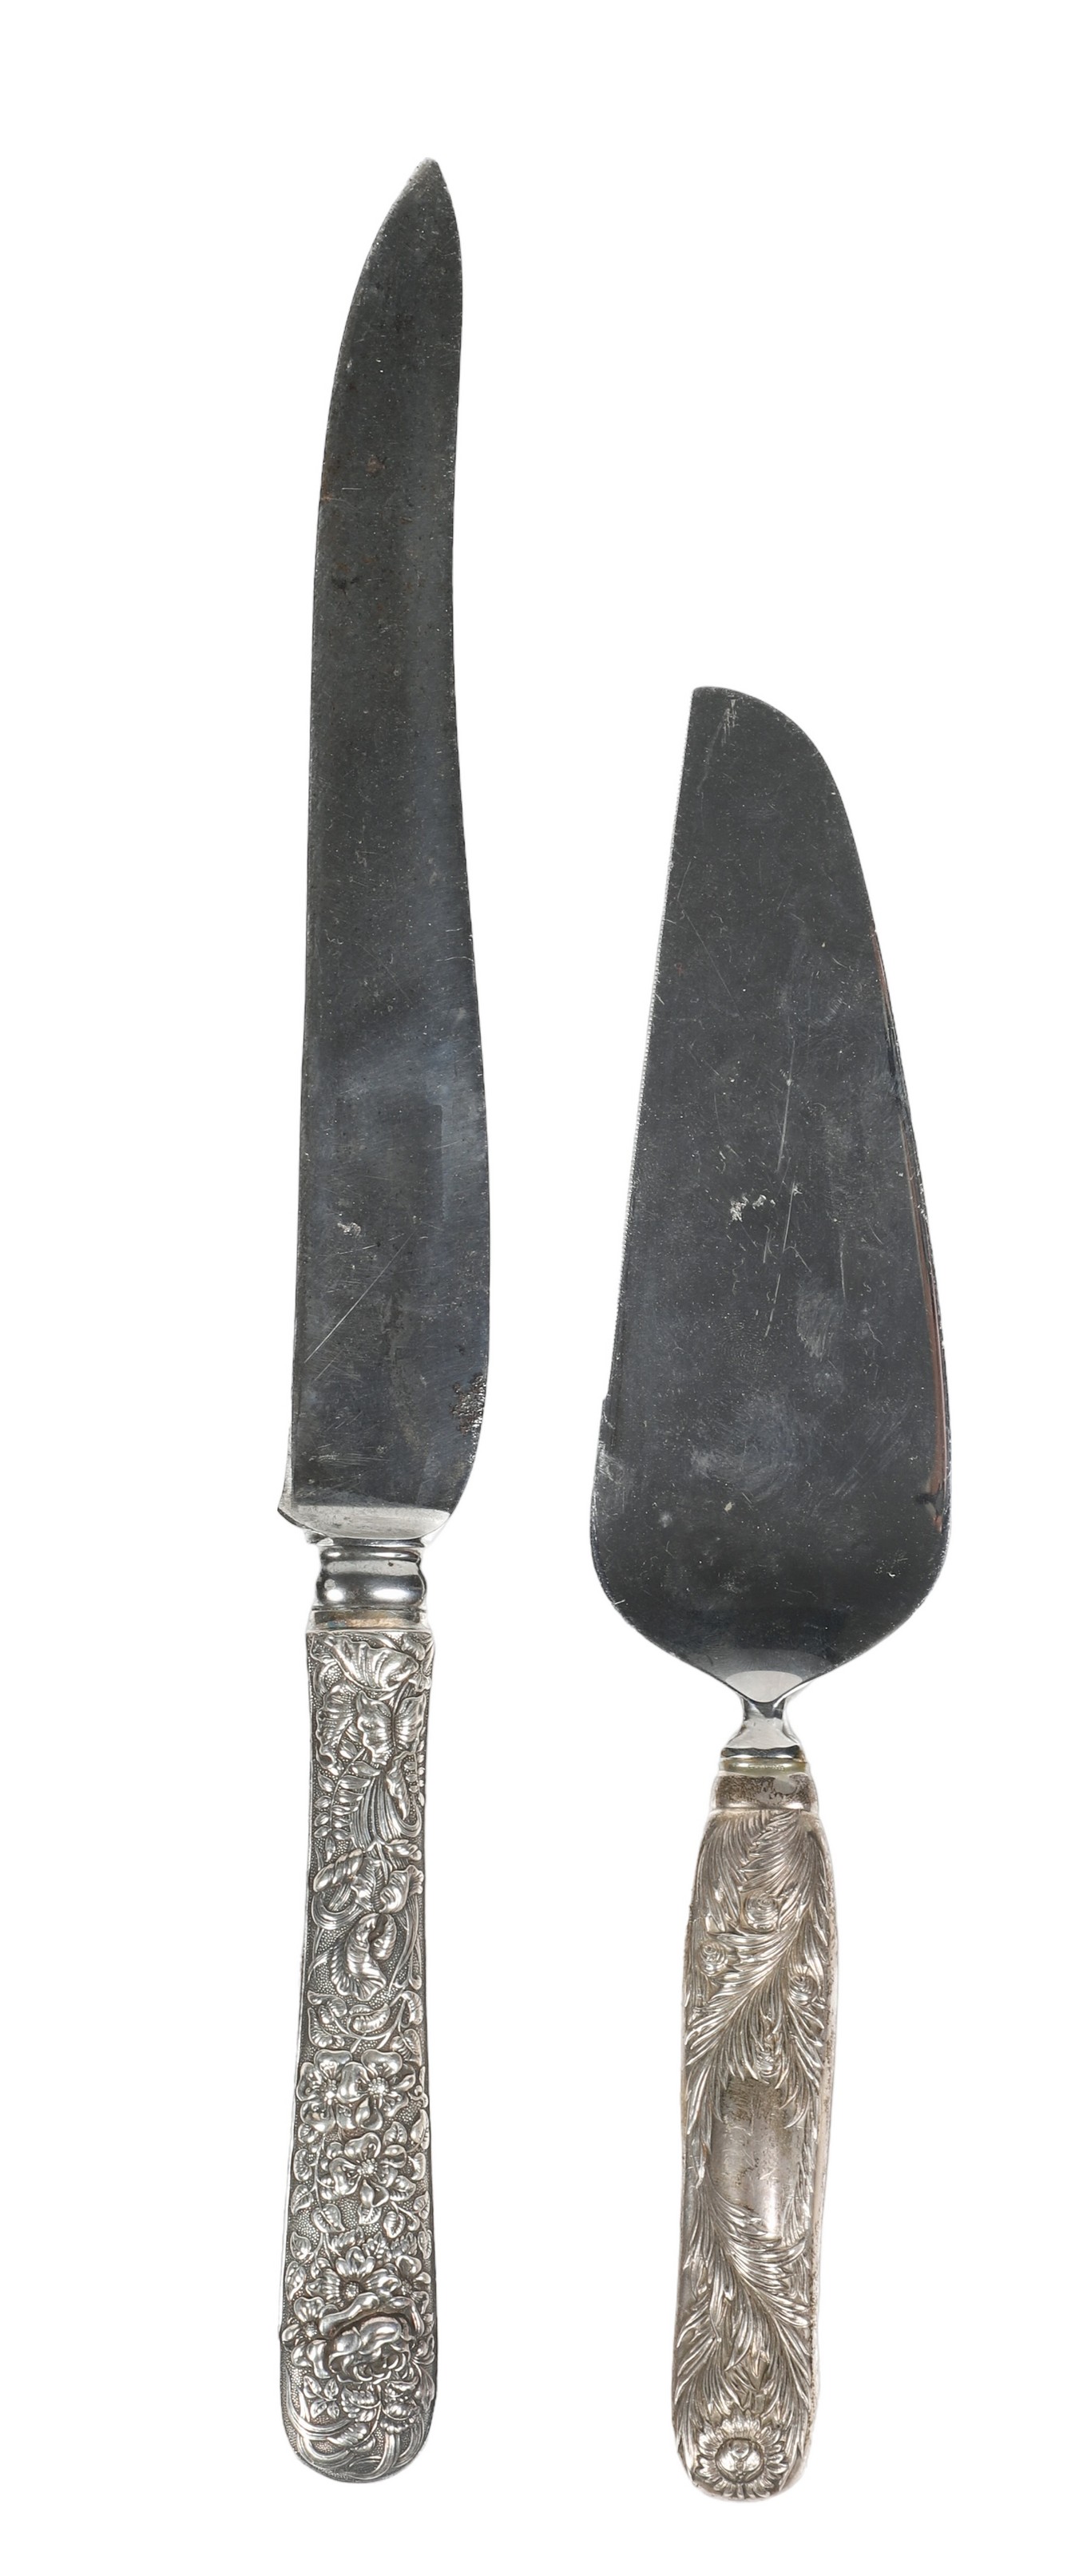 A fish knife with a Tiffany sterling